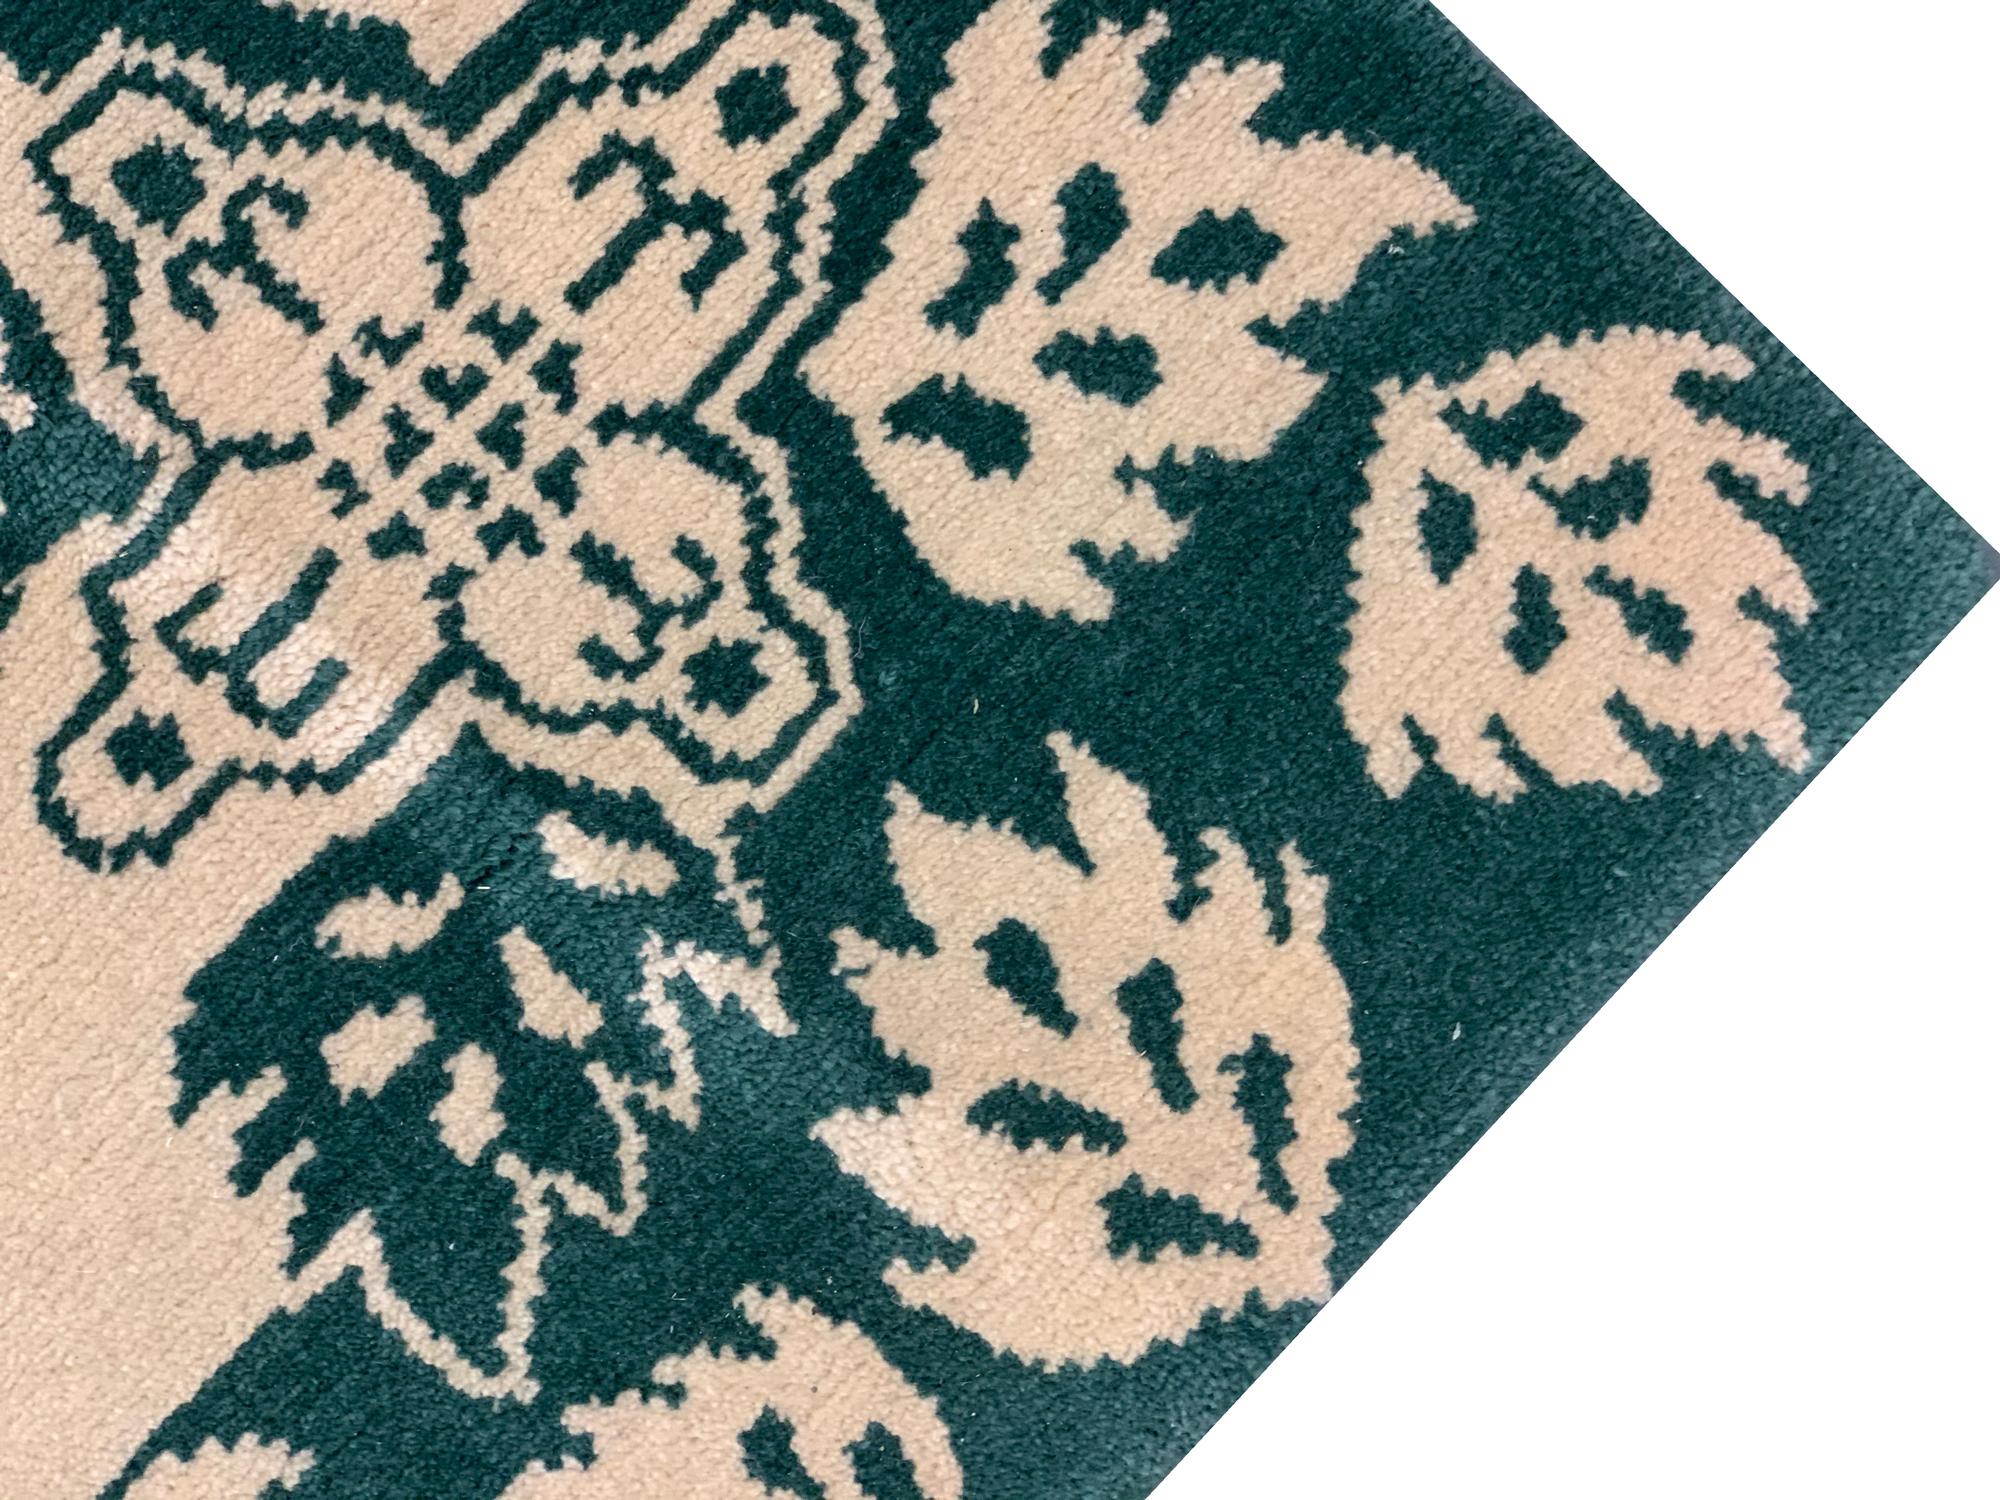 Green Modern Rug Handmade Carpet Cream Wool Area Rug for Home Decor In Excellent Condition For Sale In Hampshire, GB